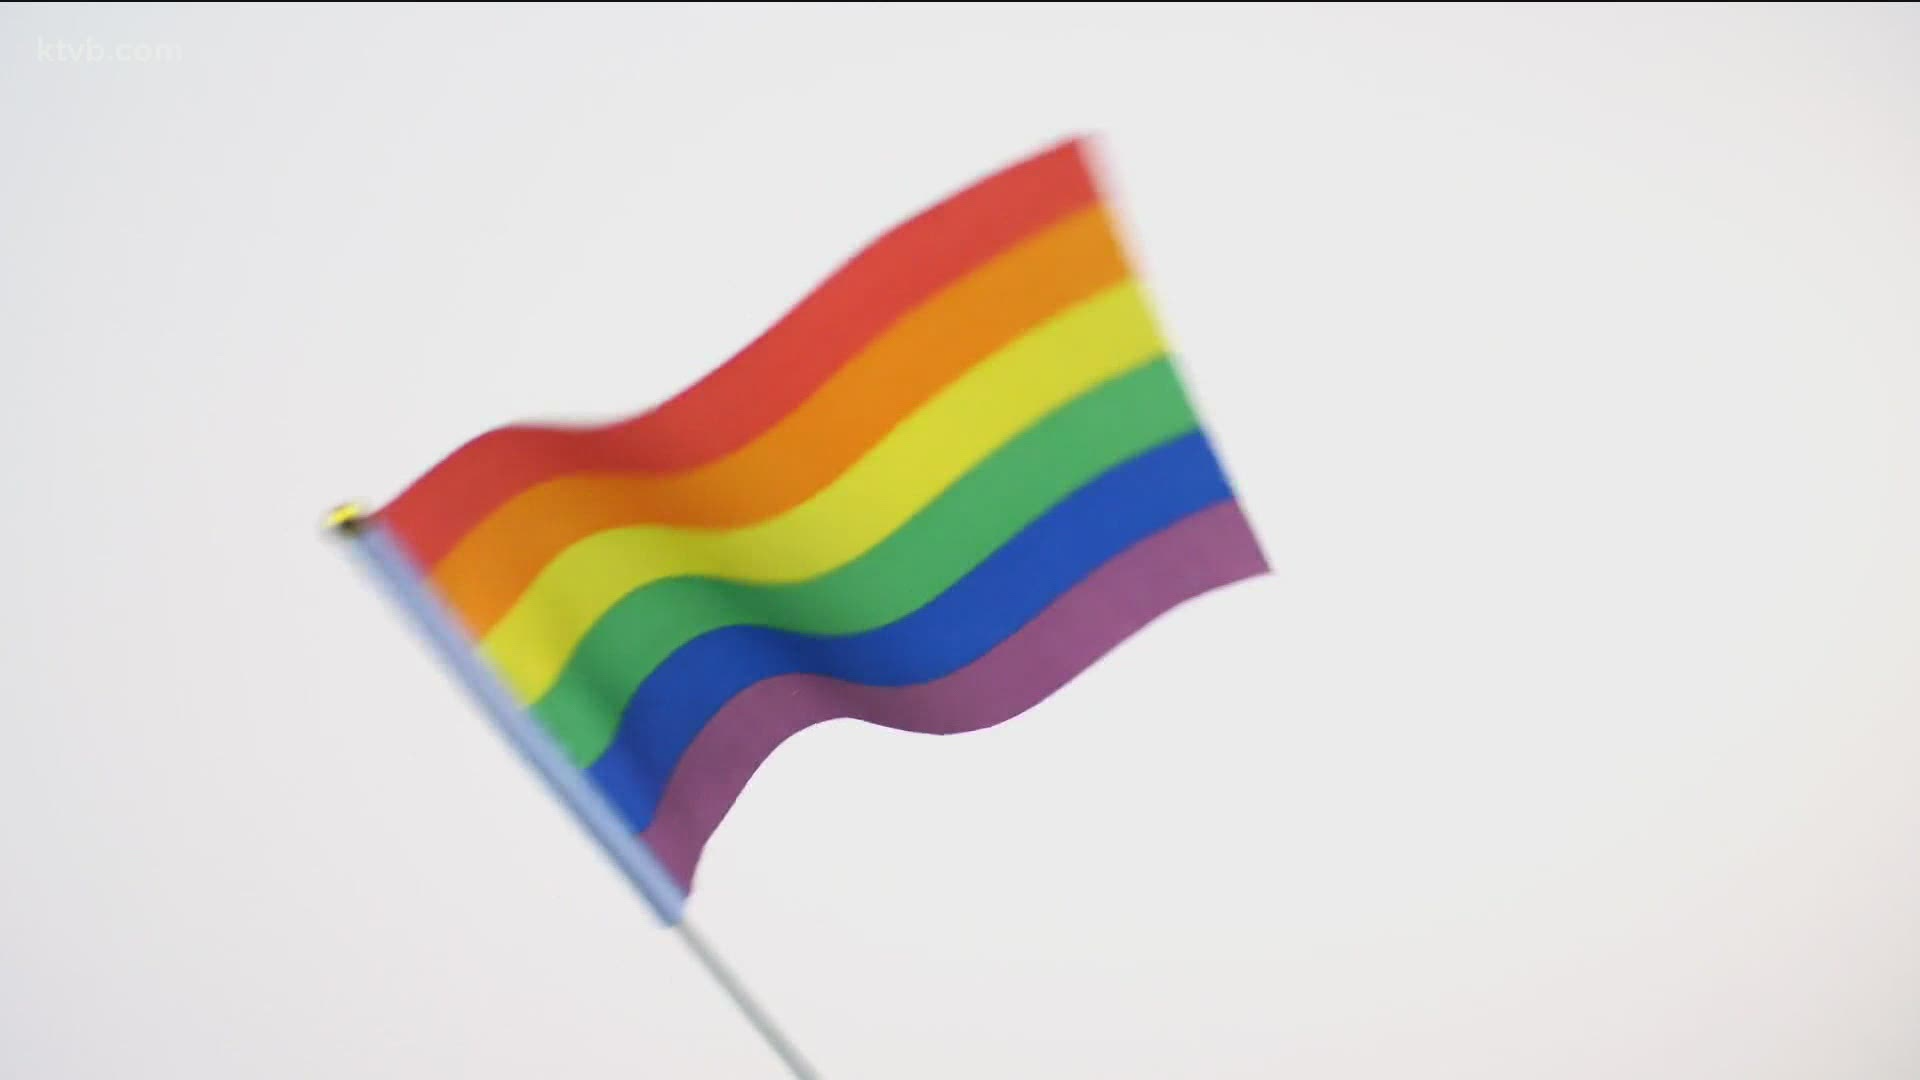 Some say their kids witnessed a group of kids harassing another student for bringing a rainbow flag to school. And say the teachers did nothing about it.